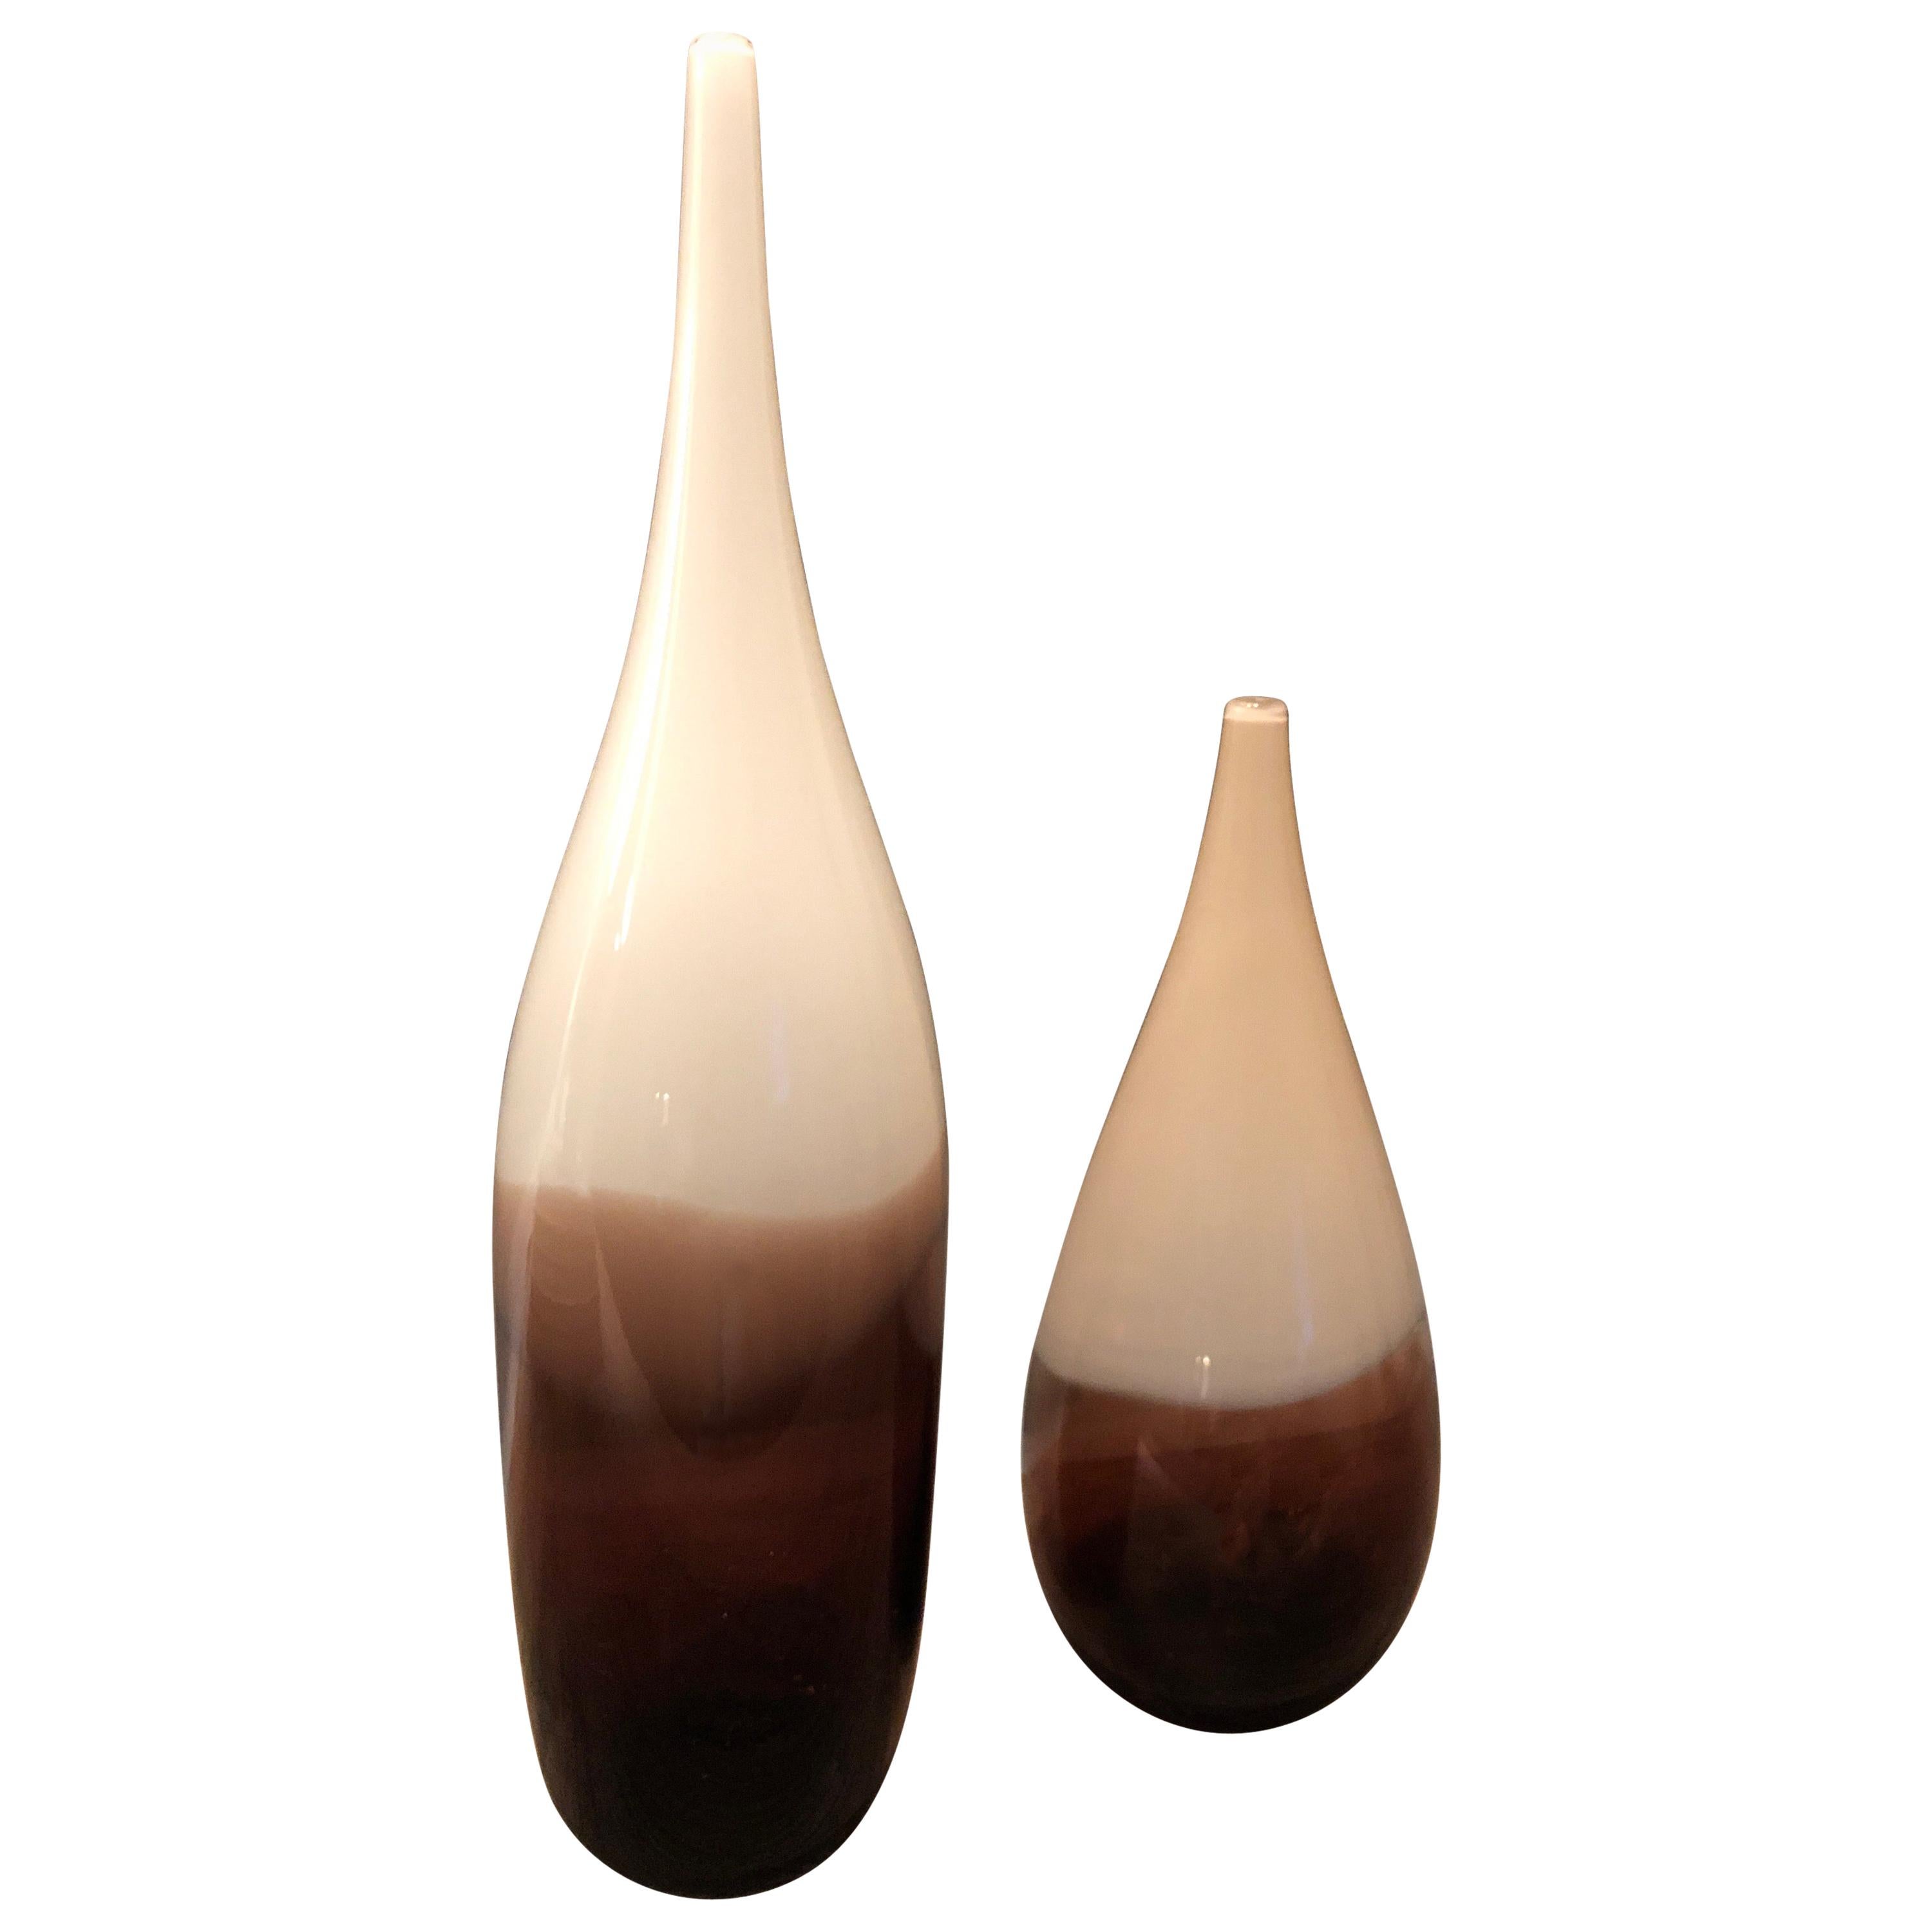 Pair of Siemon and Salazar White/Ivory/Amber Teardrop Lattimo Vases, Signed For Sale